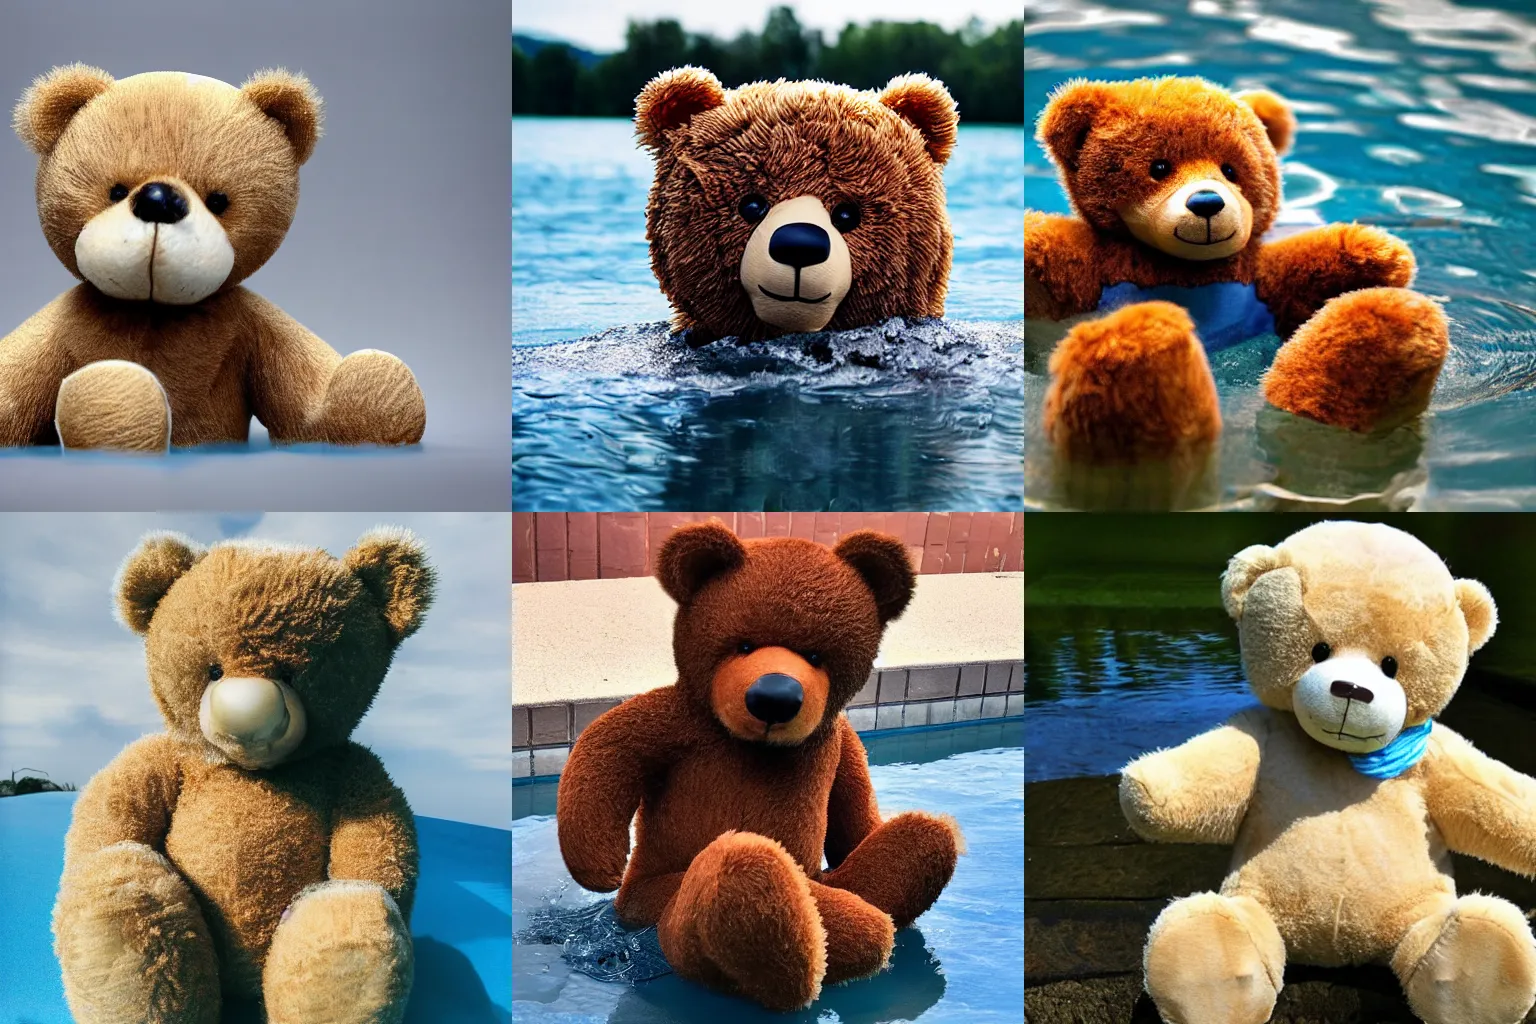 Prompt: A photo of a teddy bear made of water